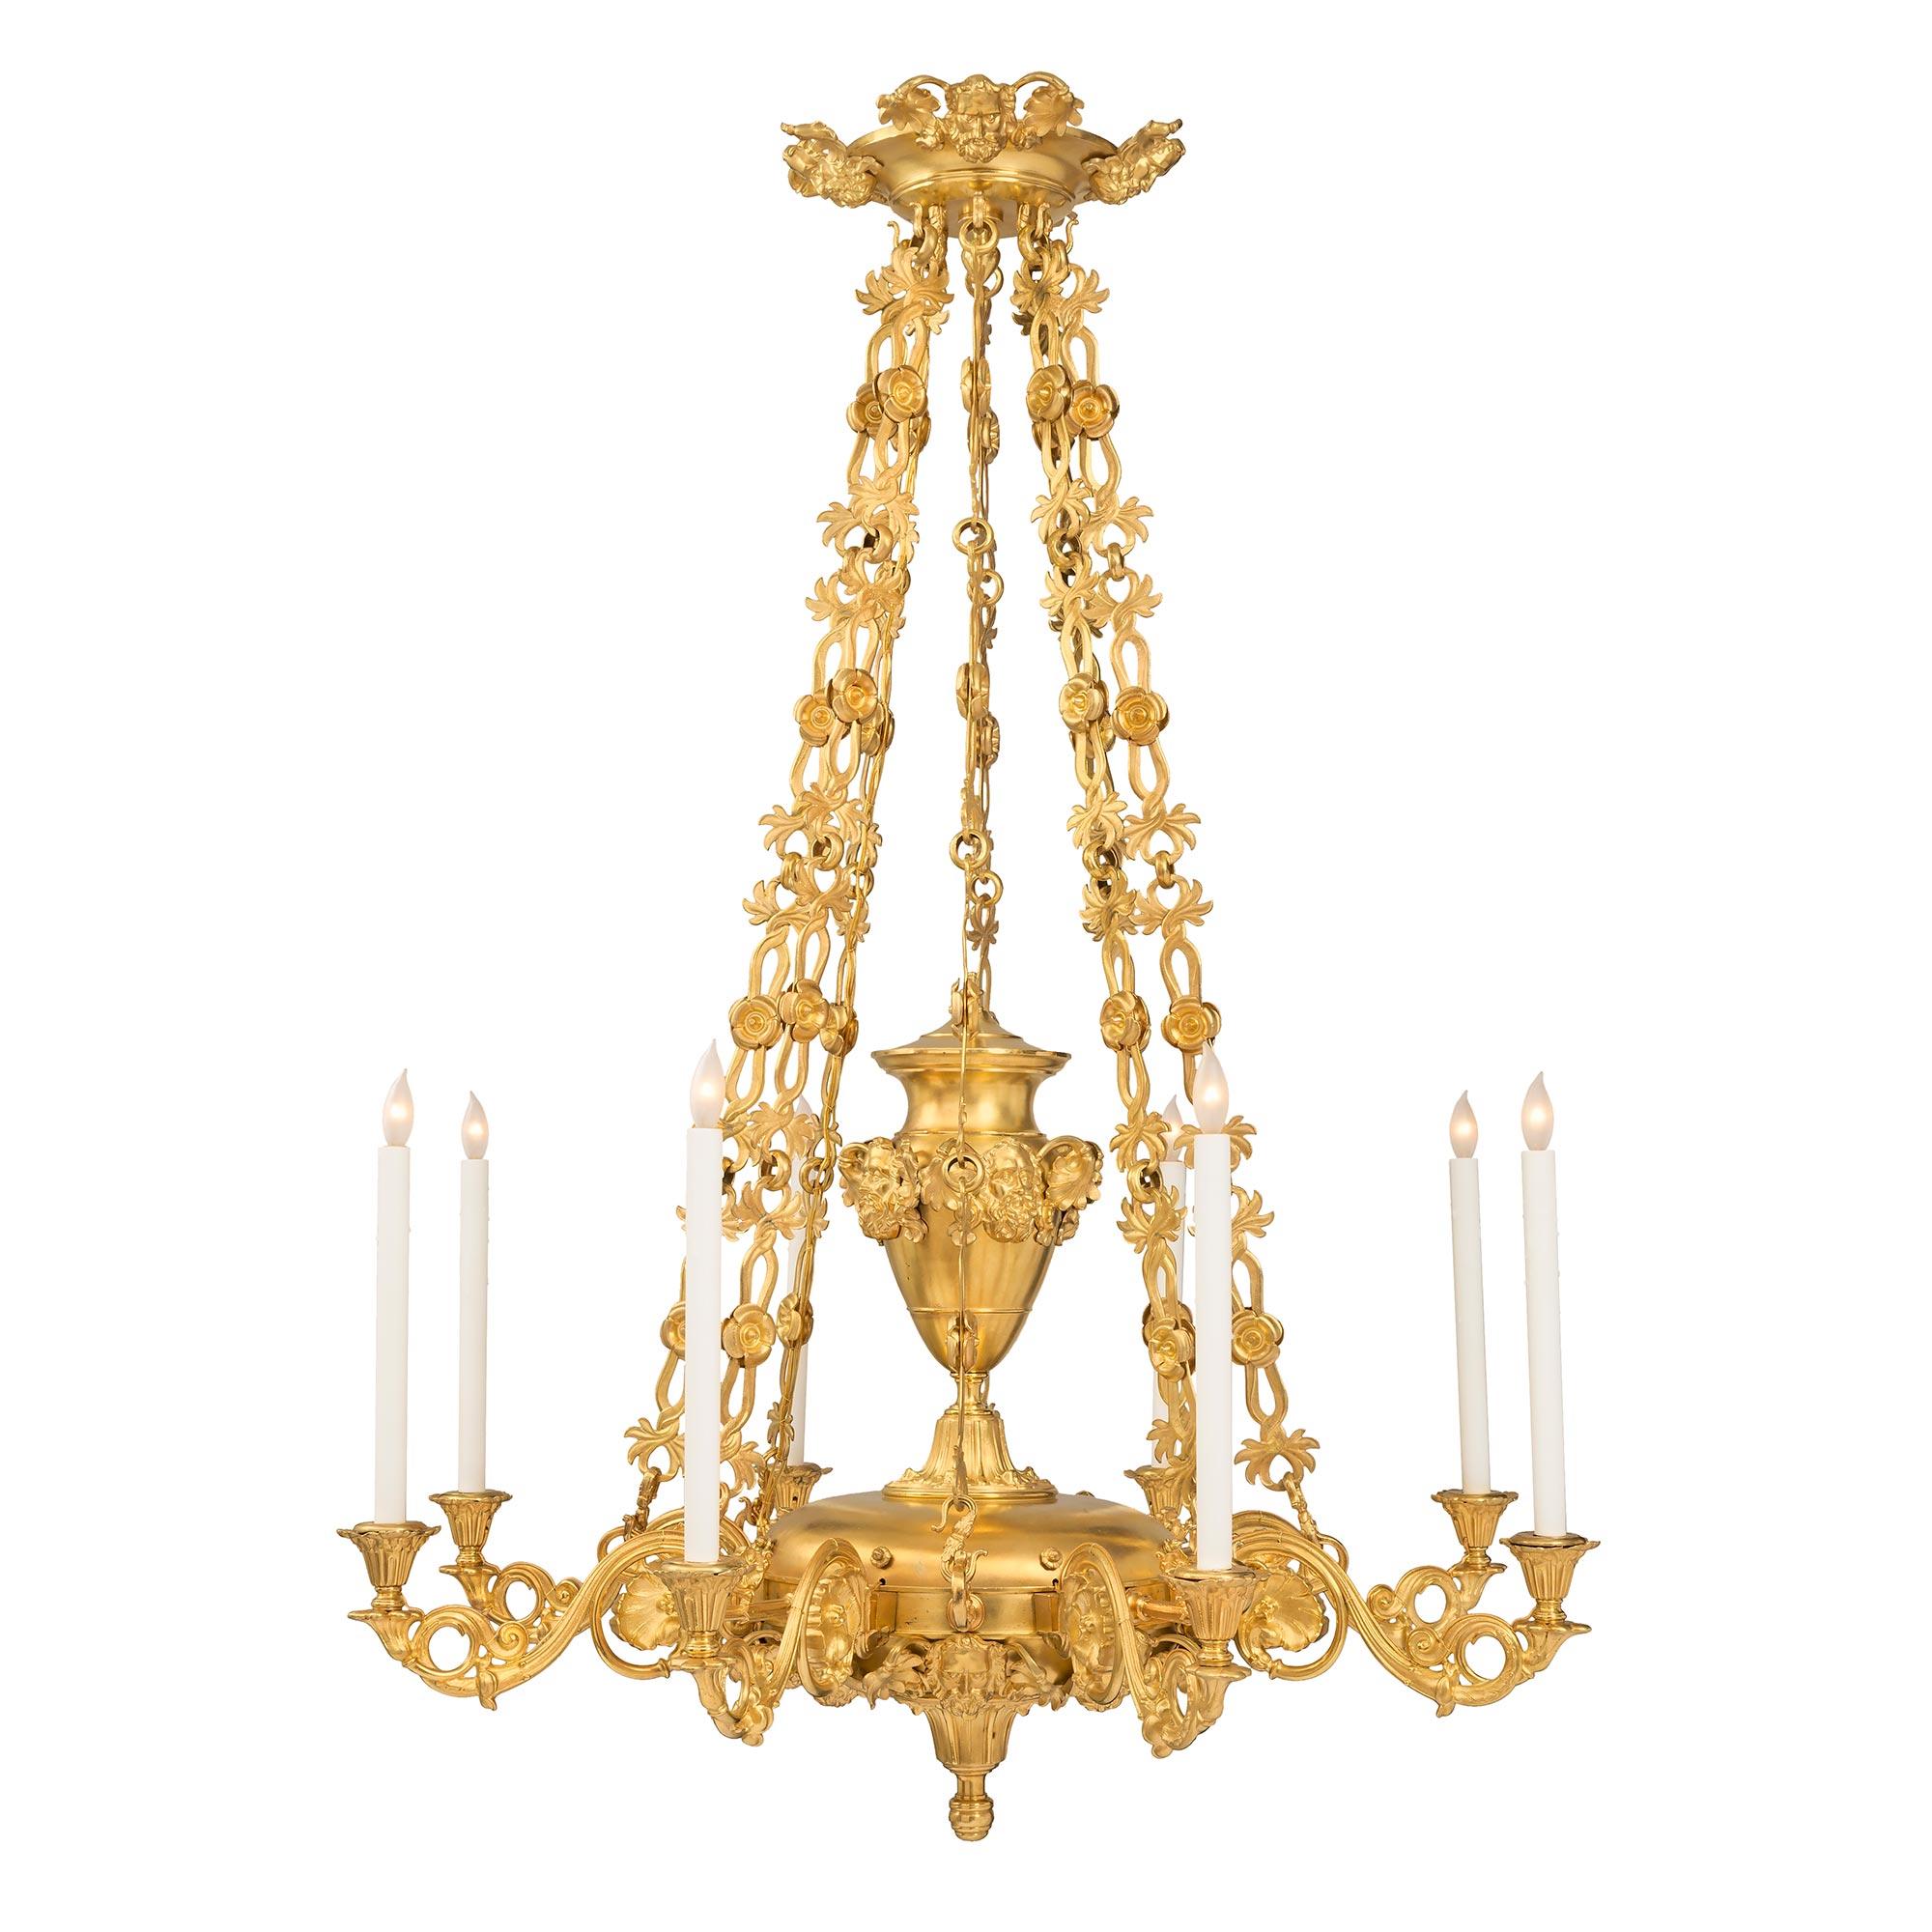 An impressive large-scale French 19th century Louis Philippe period ormolu eight-arm chandelier. The chandelier is centered by a bottom inverted finial with a mottled and foliate design. Below each arm are striking and finely detailed handsome faces